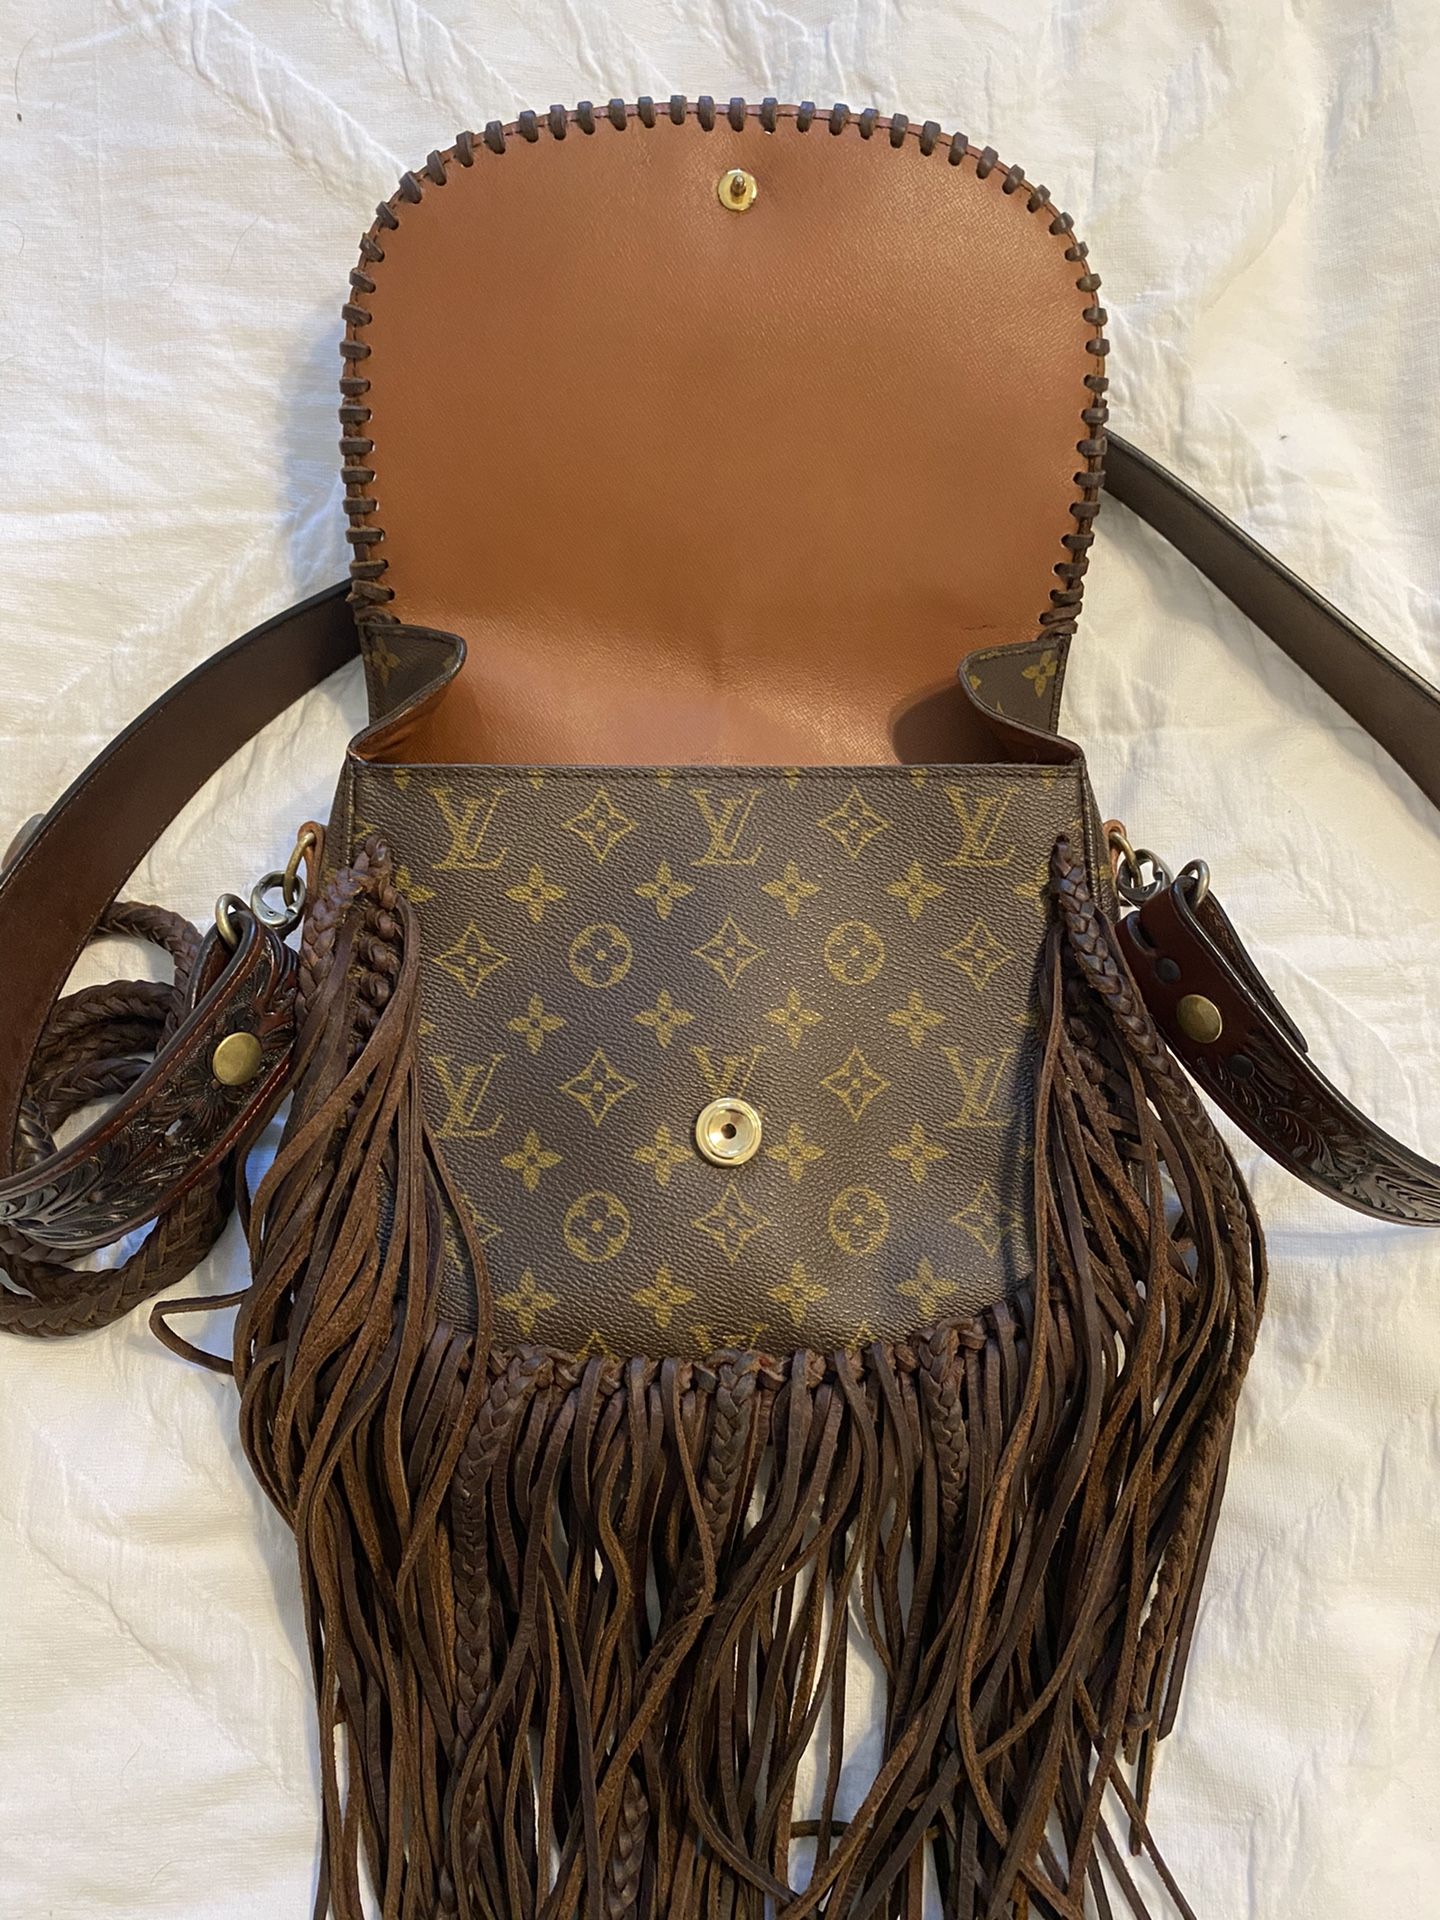 Vintage Boho Bags Louis Vuitton Crossbody for Sale in Frisco, TX - OfferUp